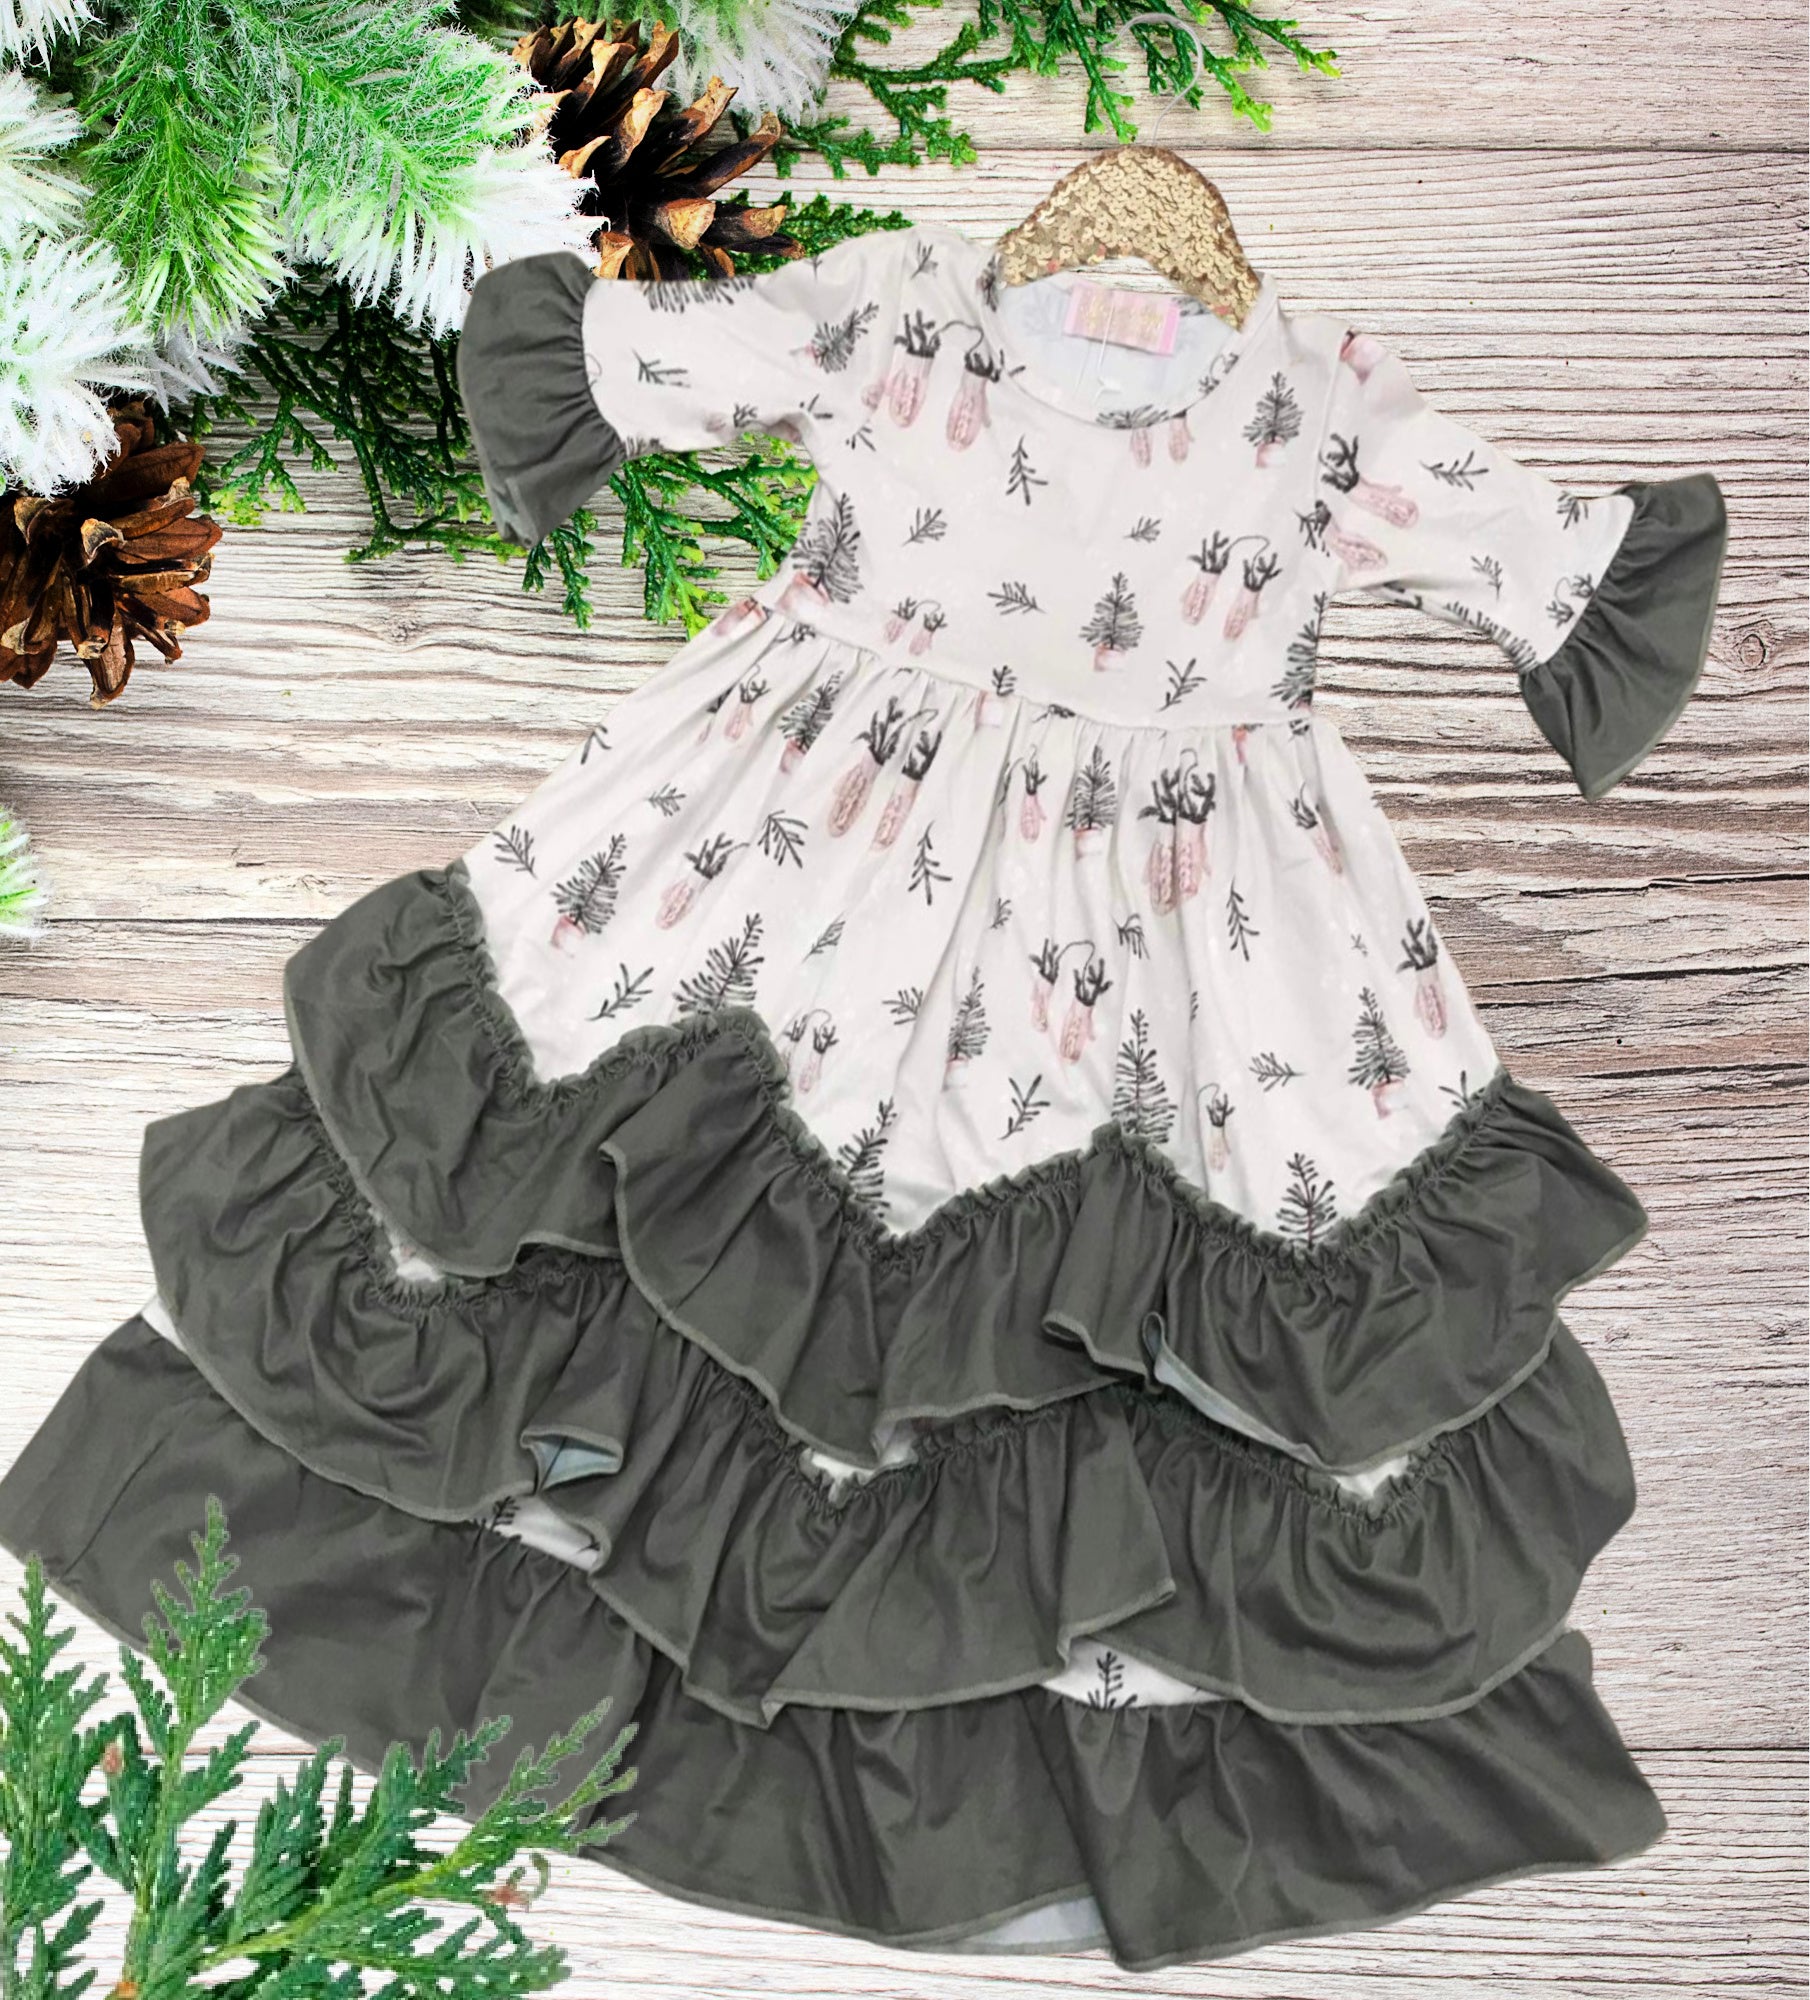 Girls Long Ruffle Holiday/Christmas Dresses - Blush & Green Mitts with tree sapplings